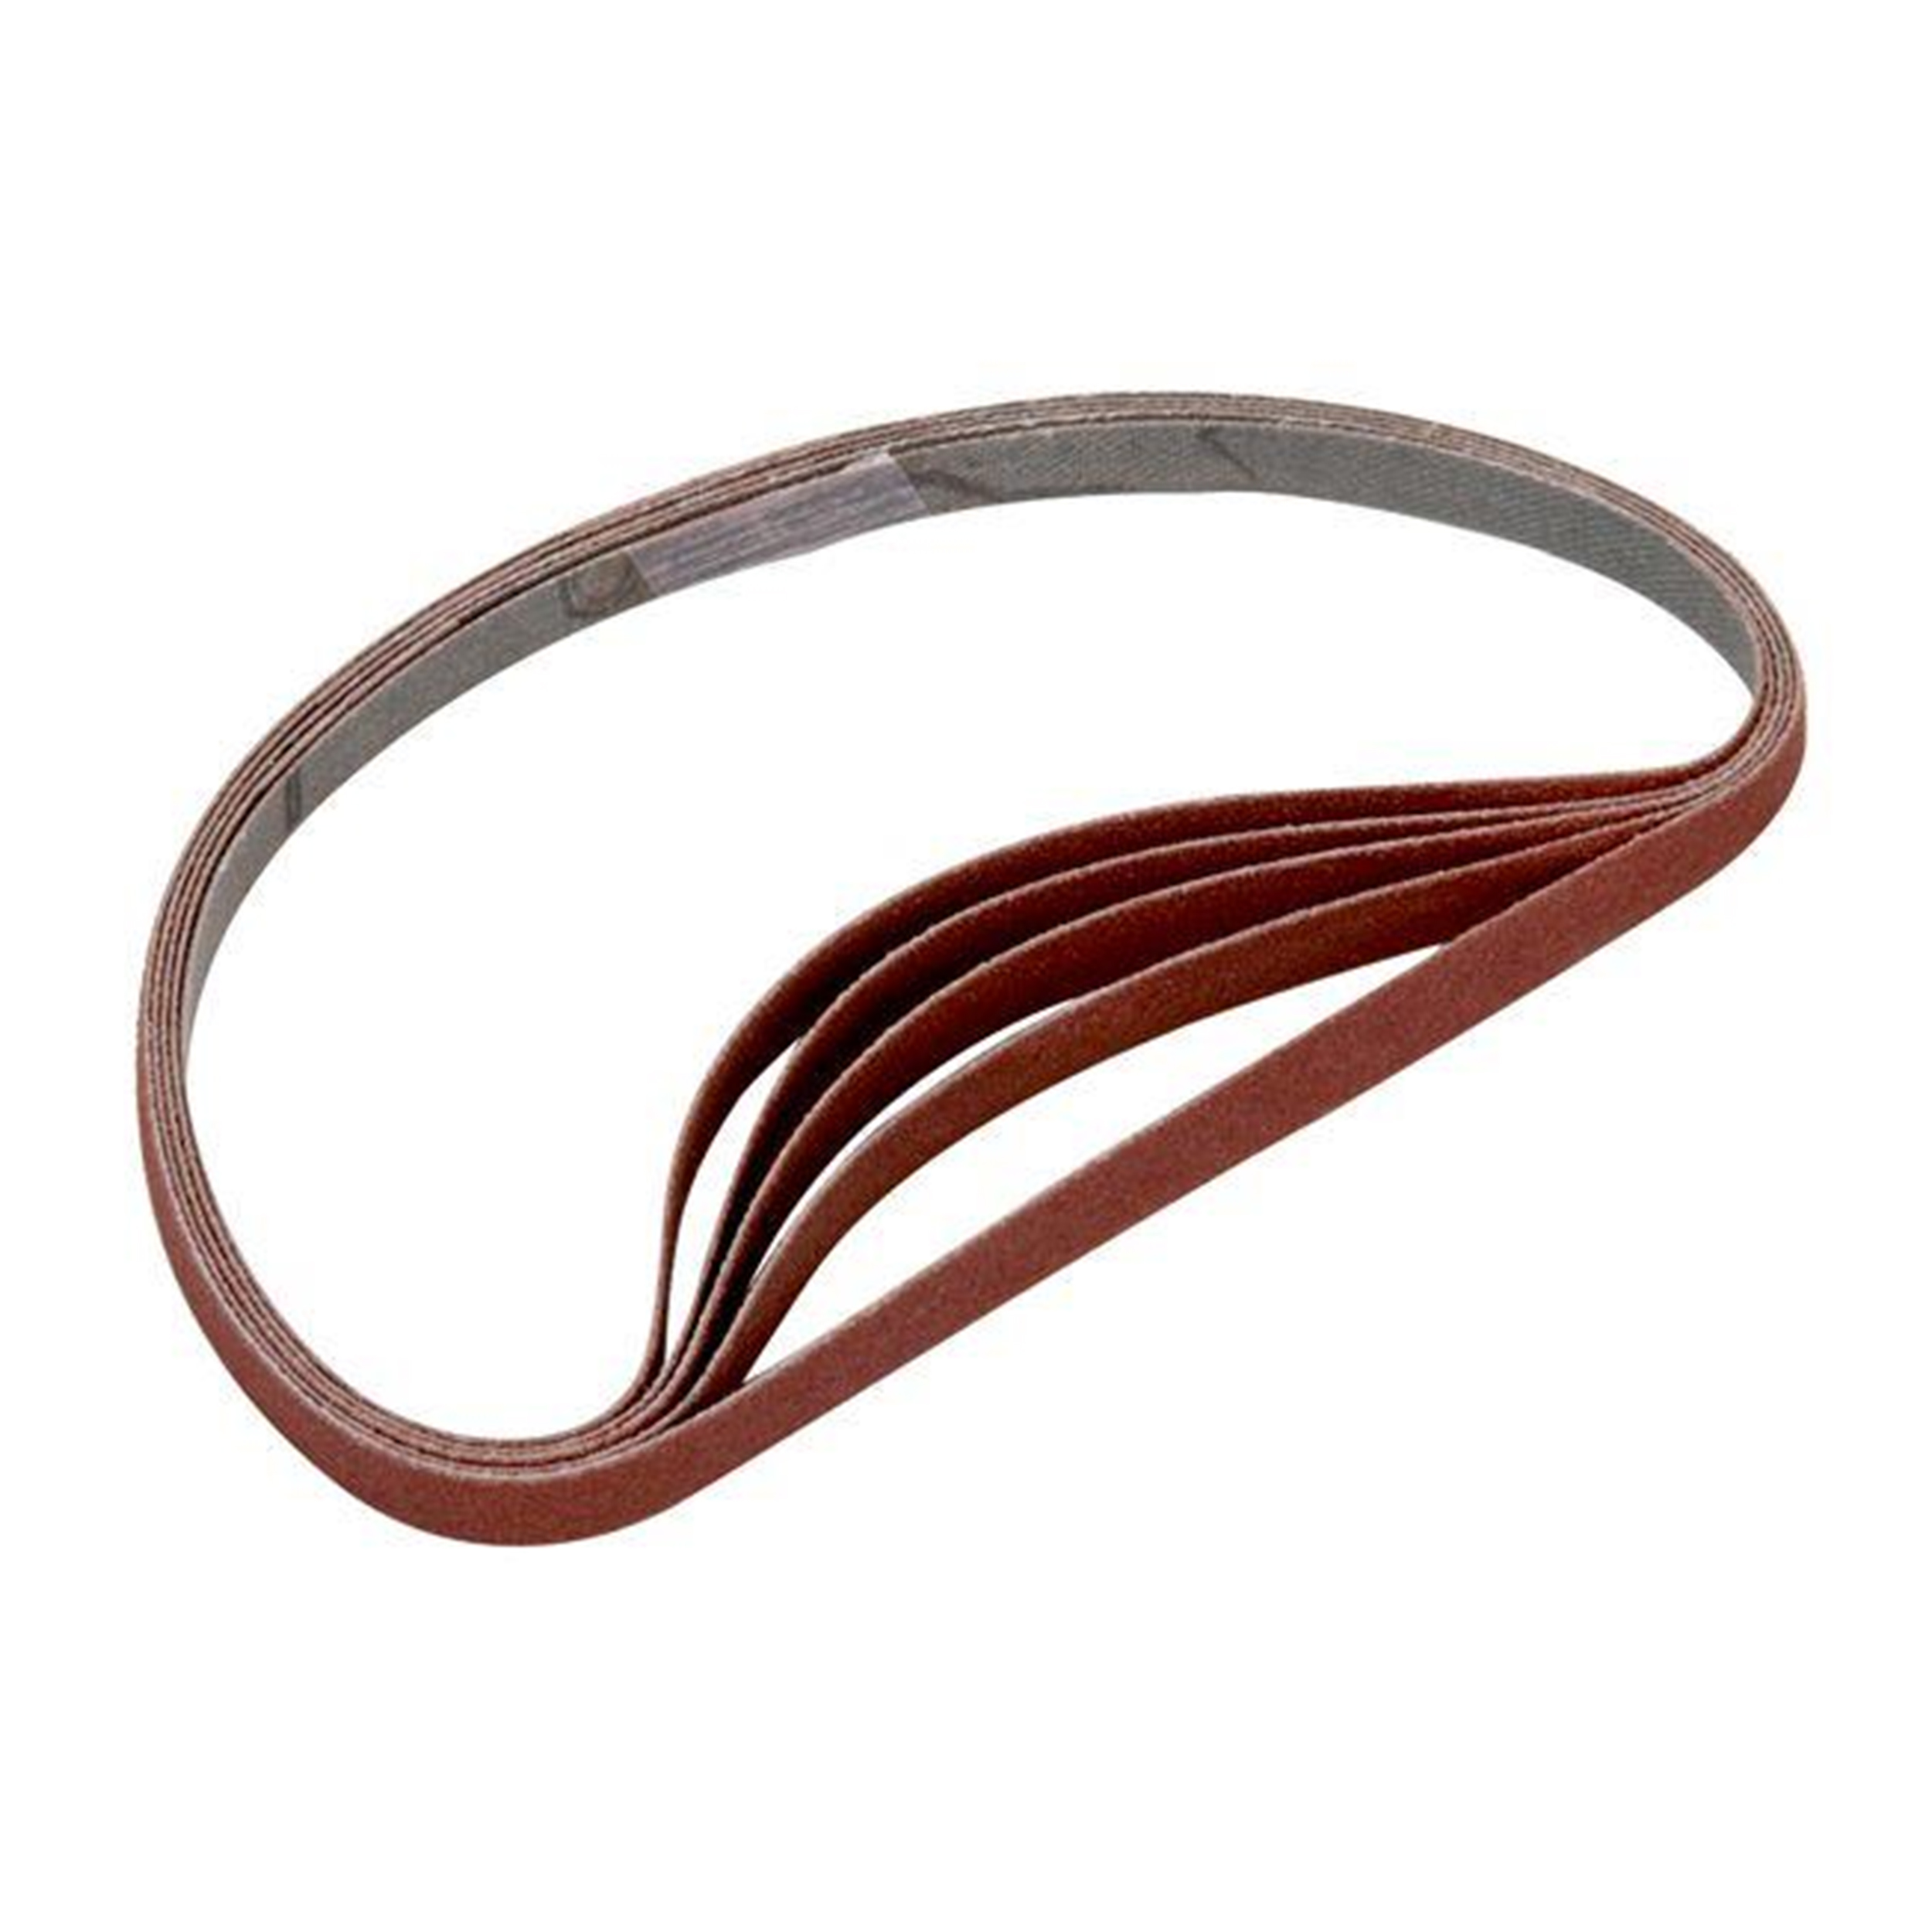 Sanding Stick Replacement Belts, 120 Grit, 5 Pack